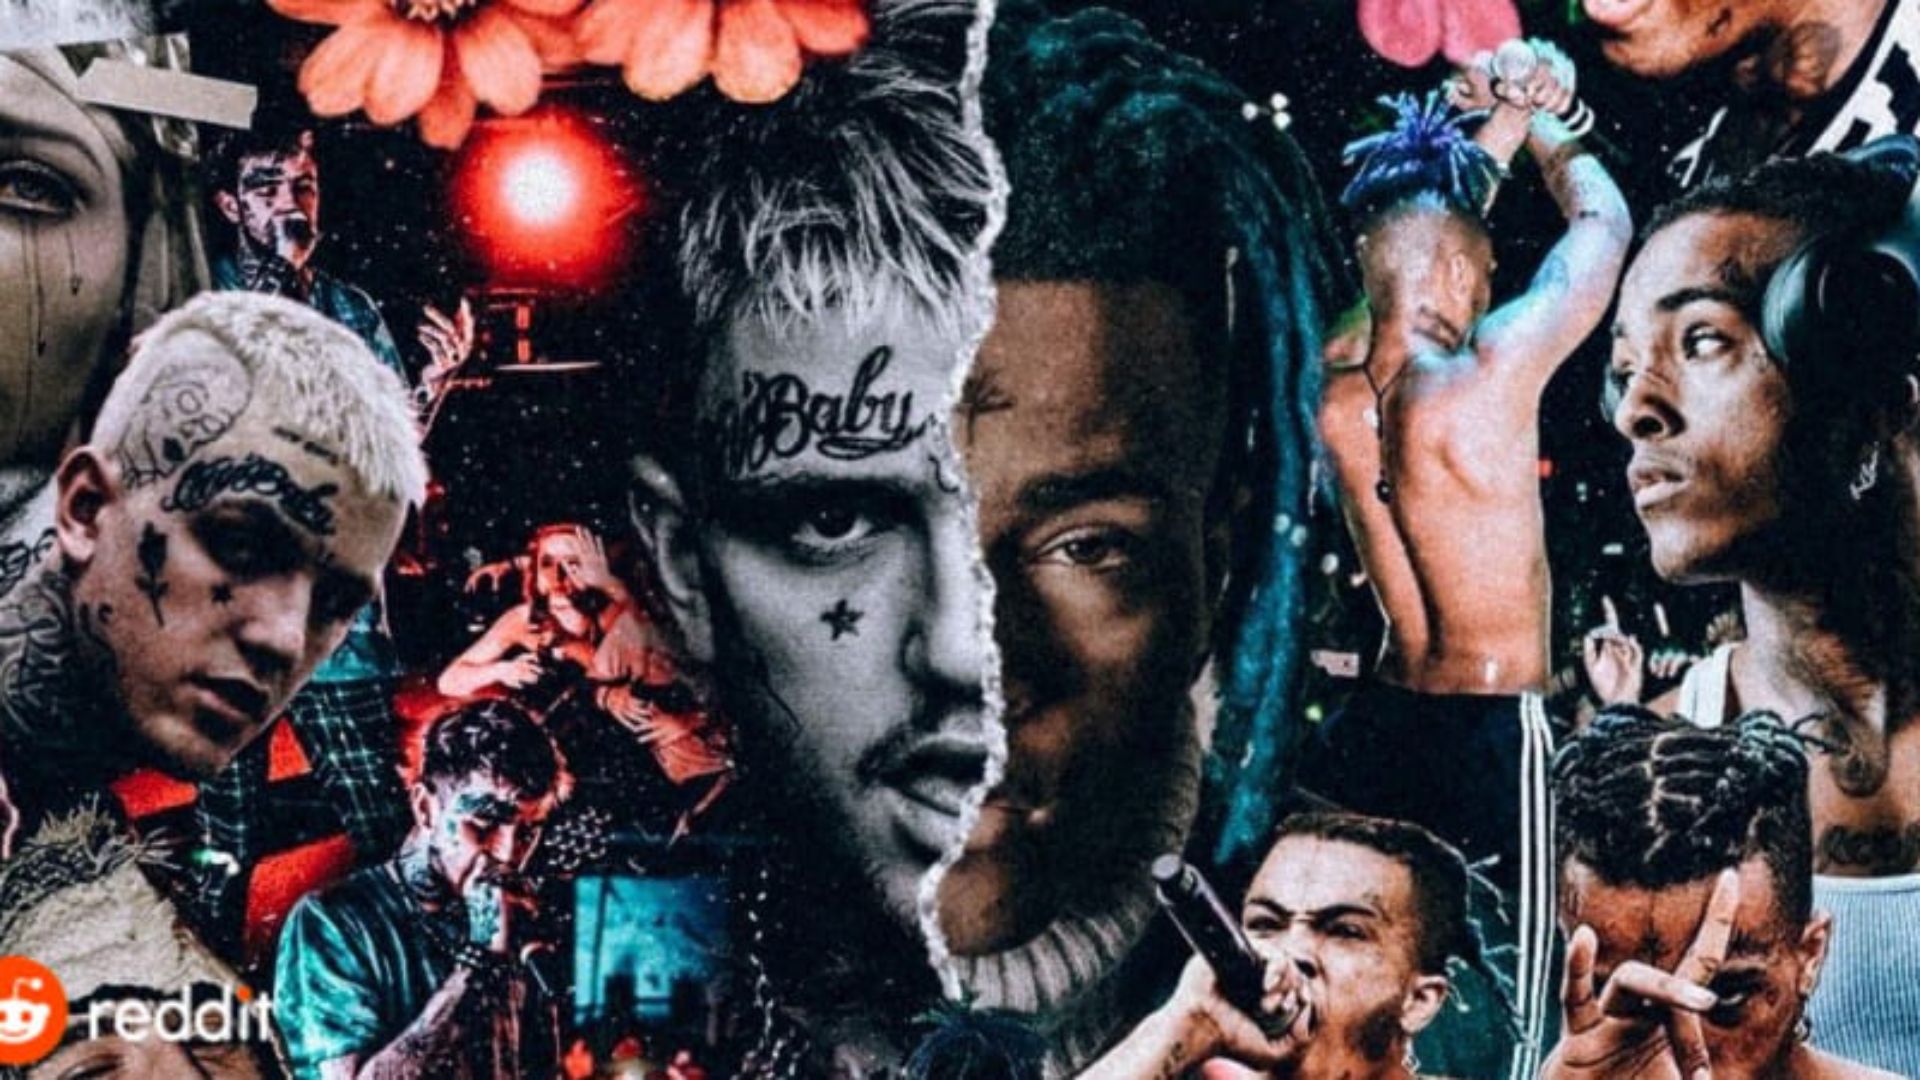 A collection of rap and hip hop images - Lil Peep